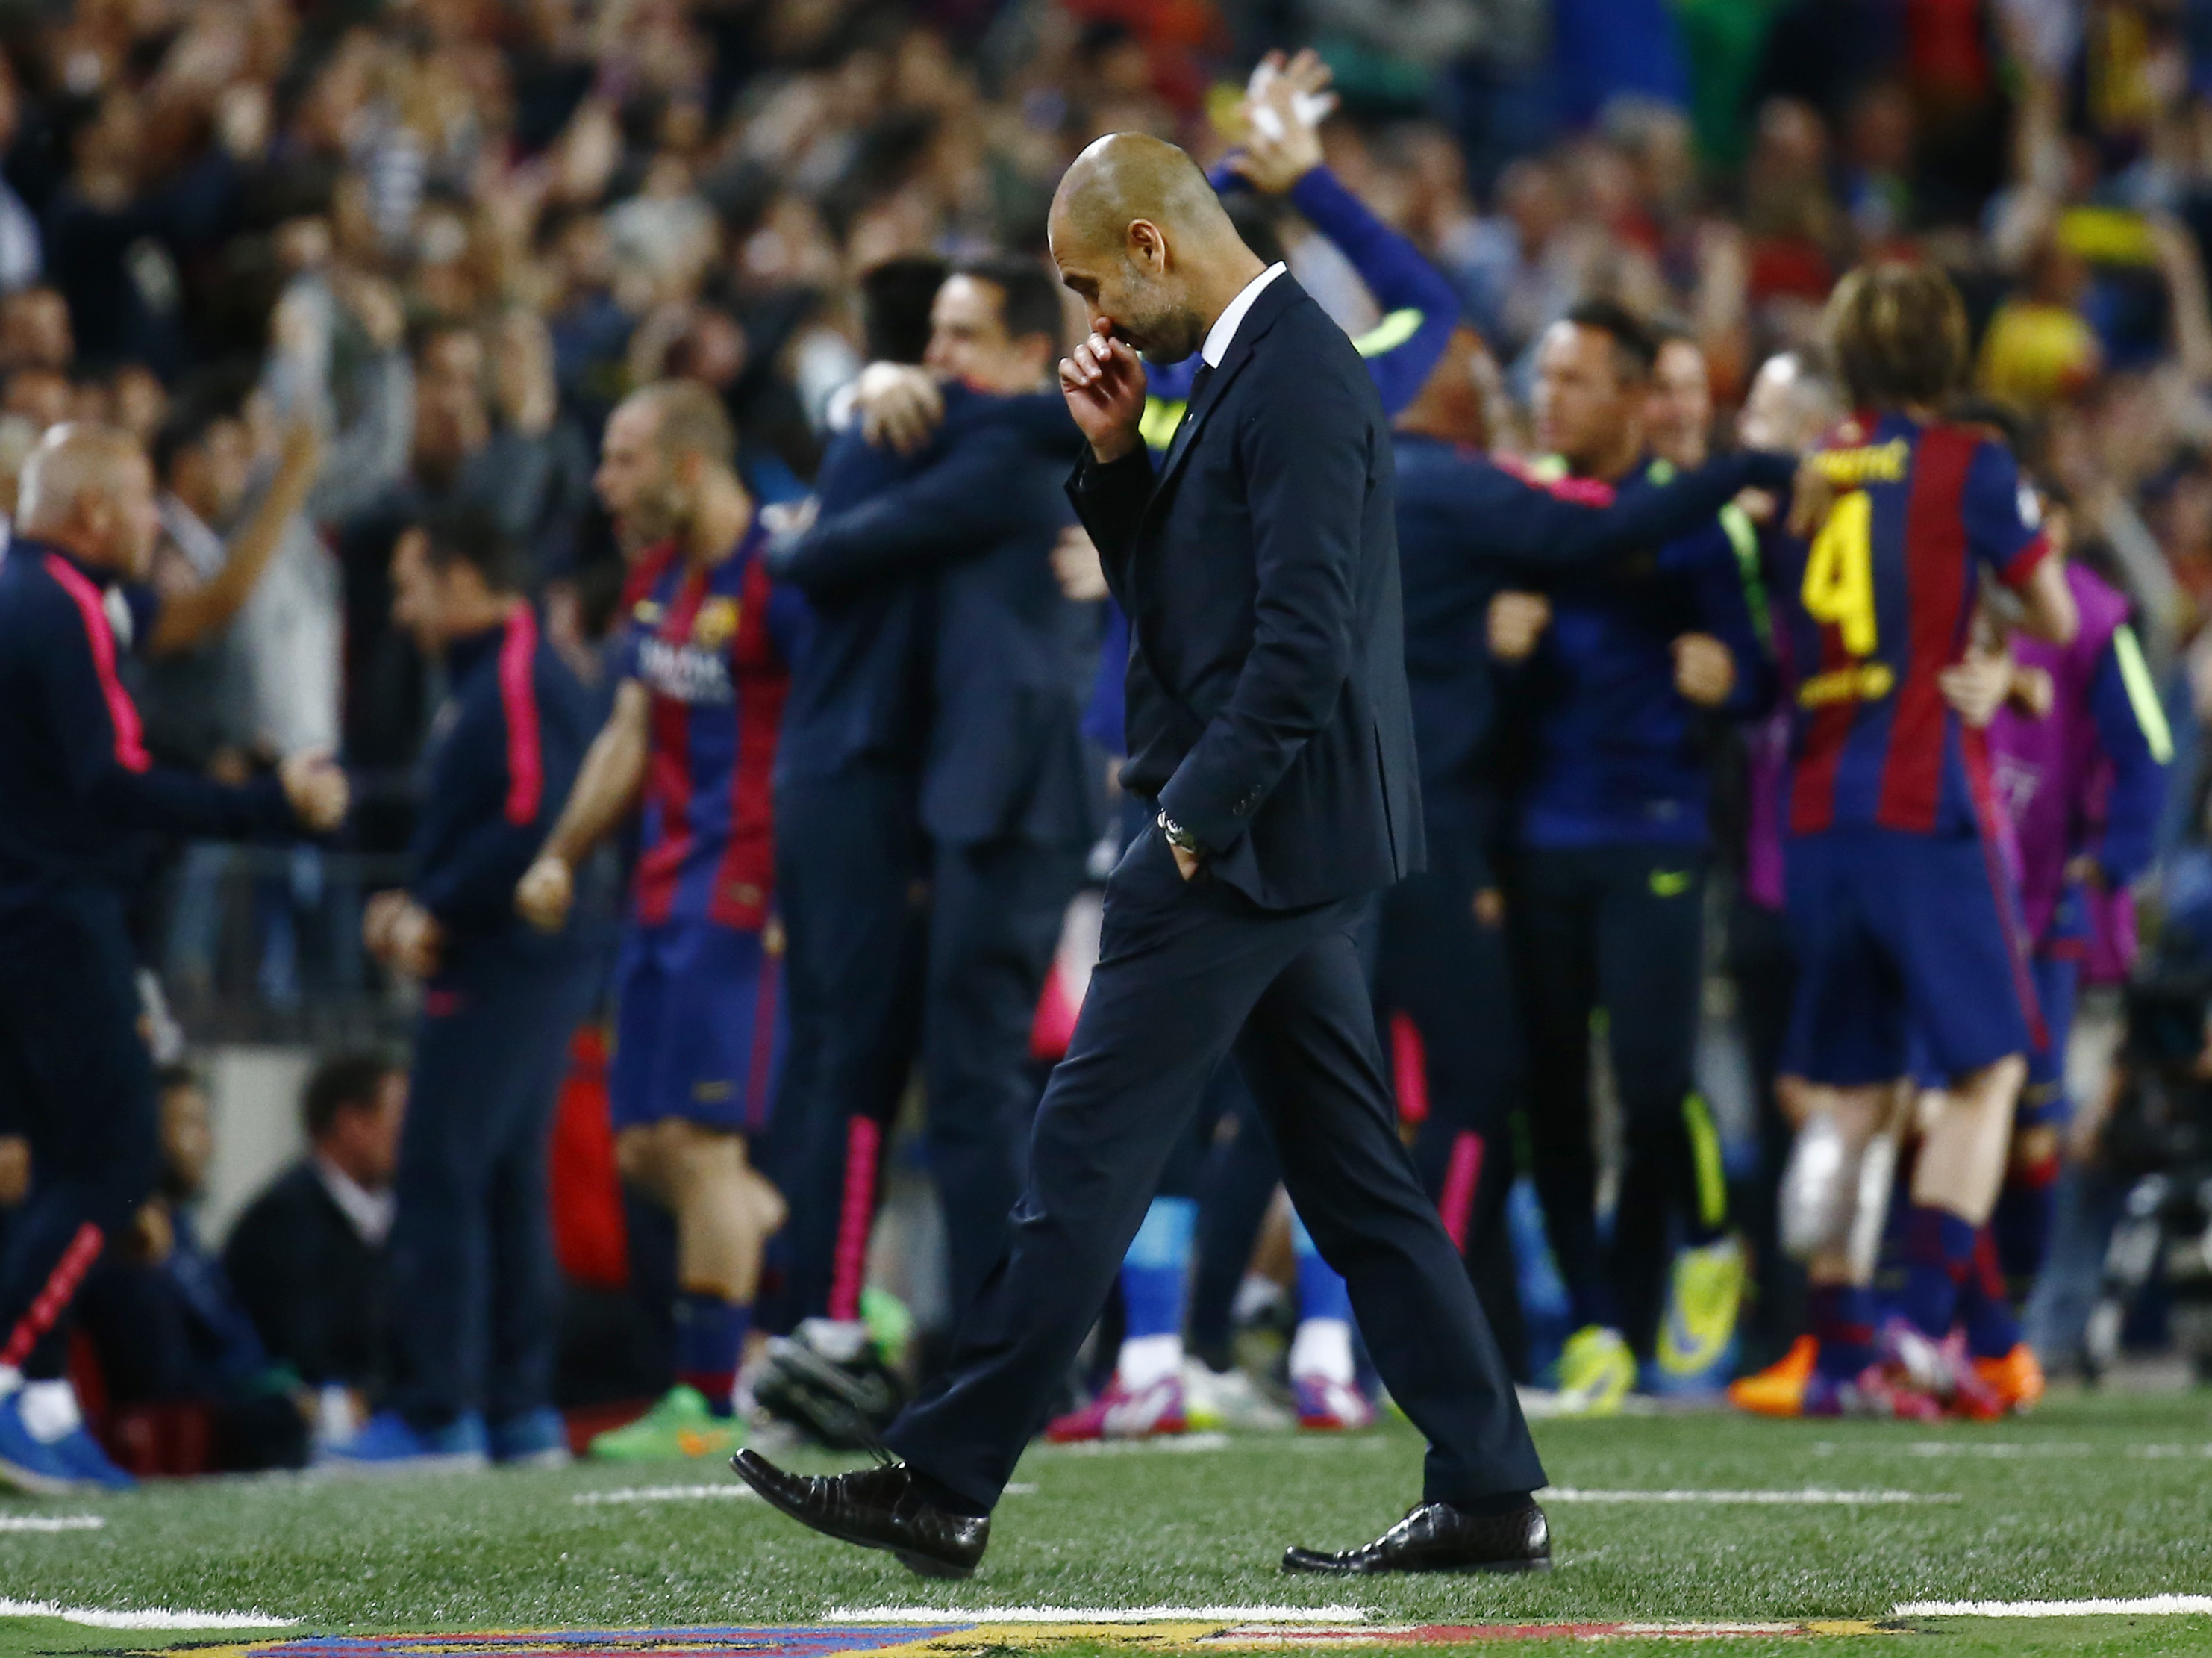 The 3-0 defeat in the first leg was a chastening experience for Bayern Munich manager Pep Guardiola. Photo: Reuters